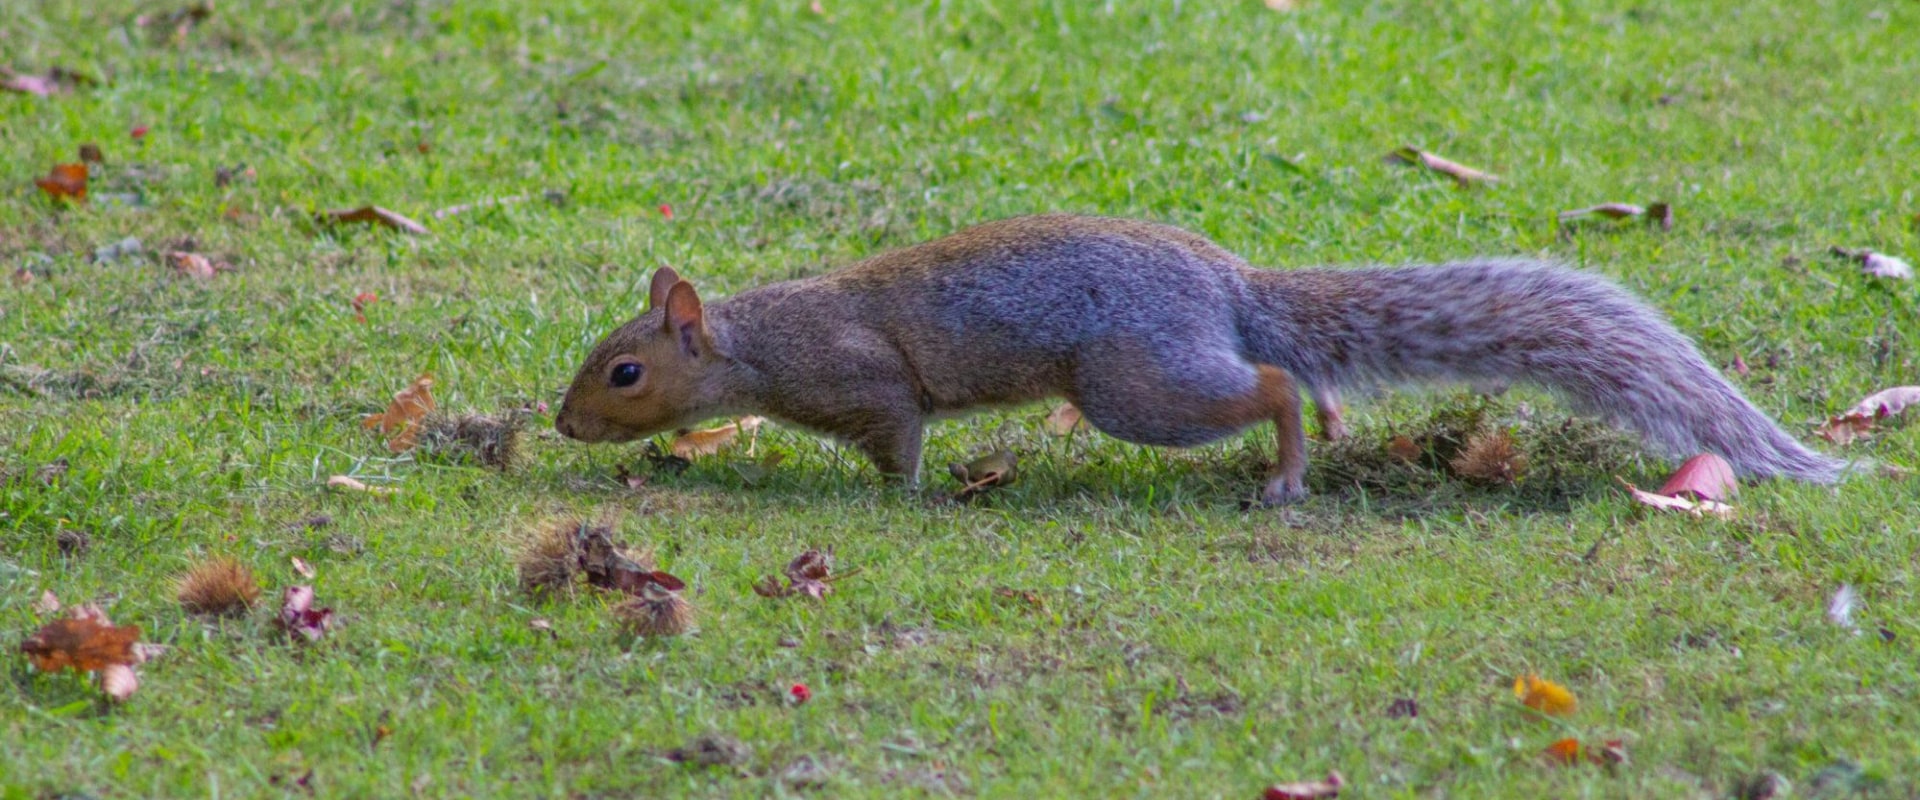 Protect Your Trees From Damage By Hiring A Professional Squirrel Removal Service In Houston